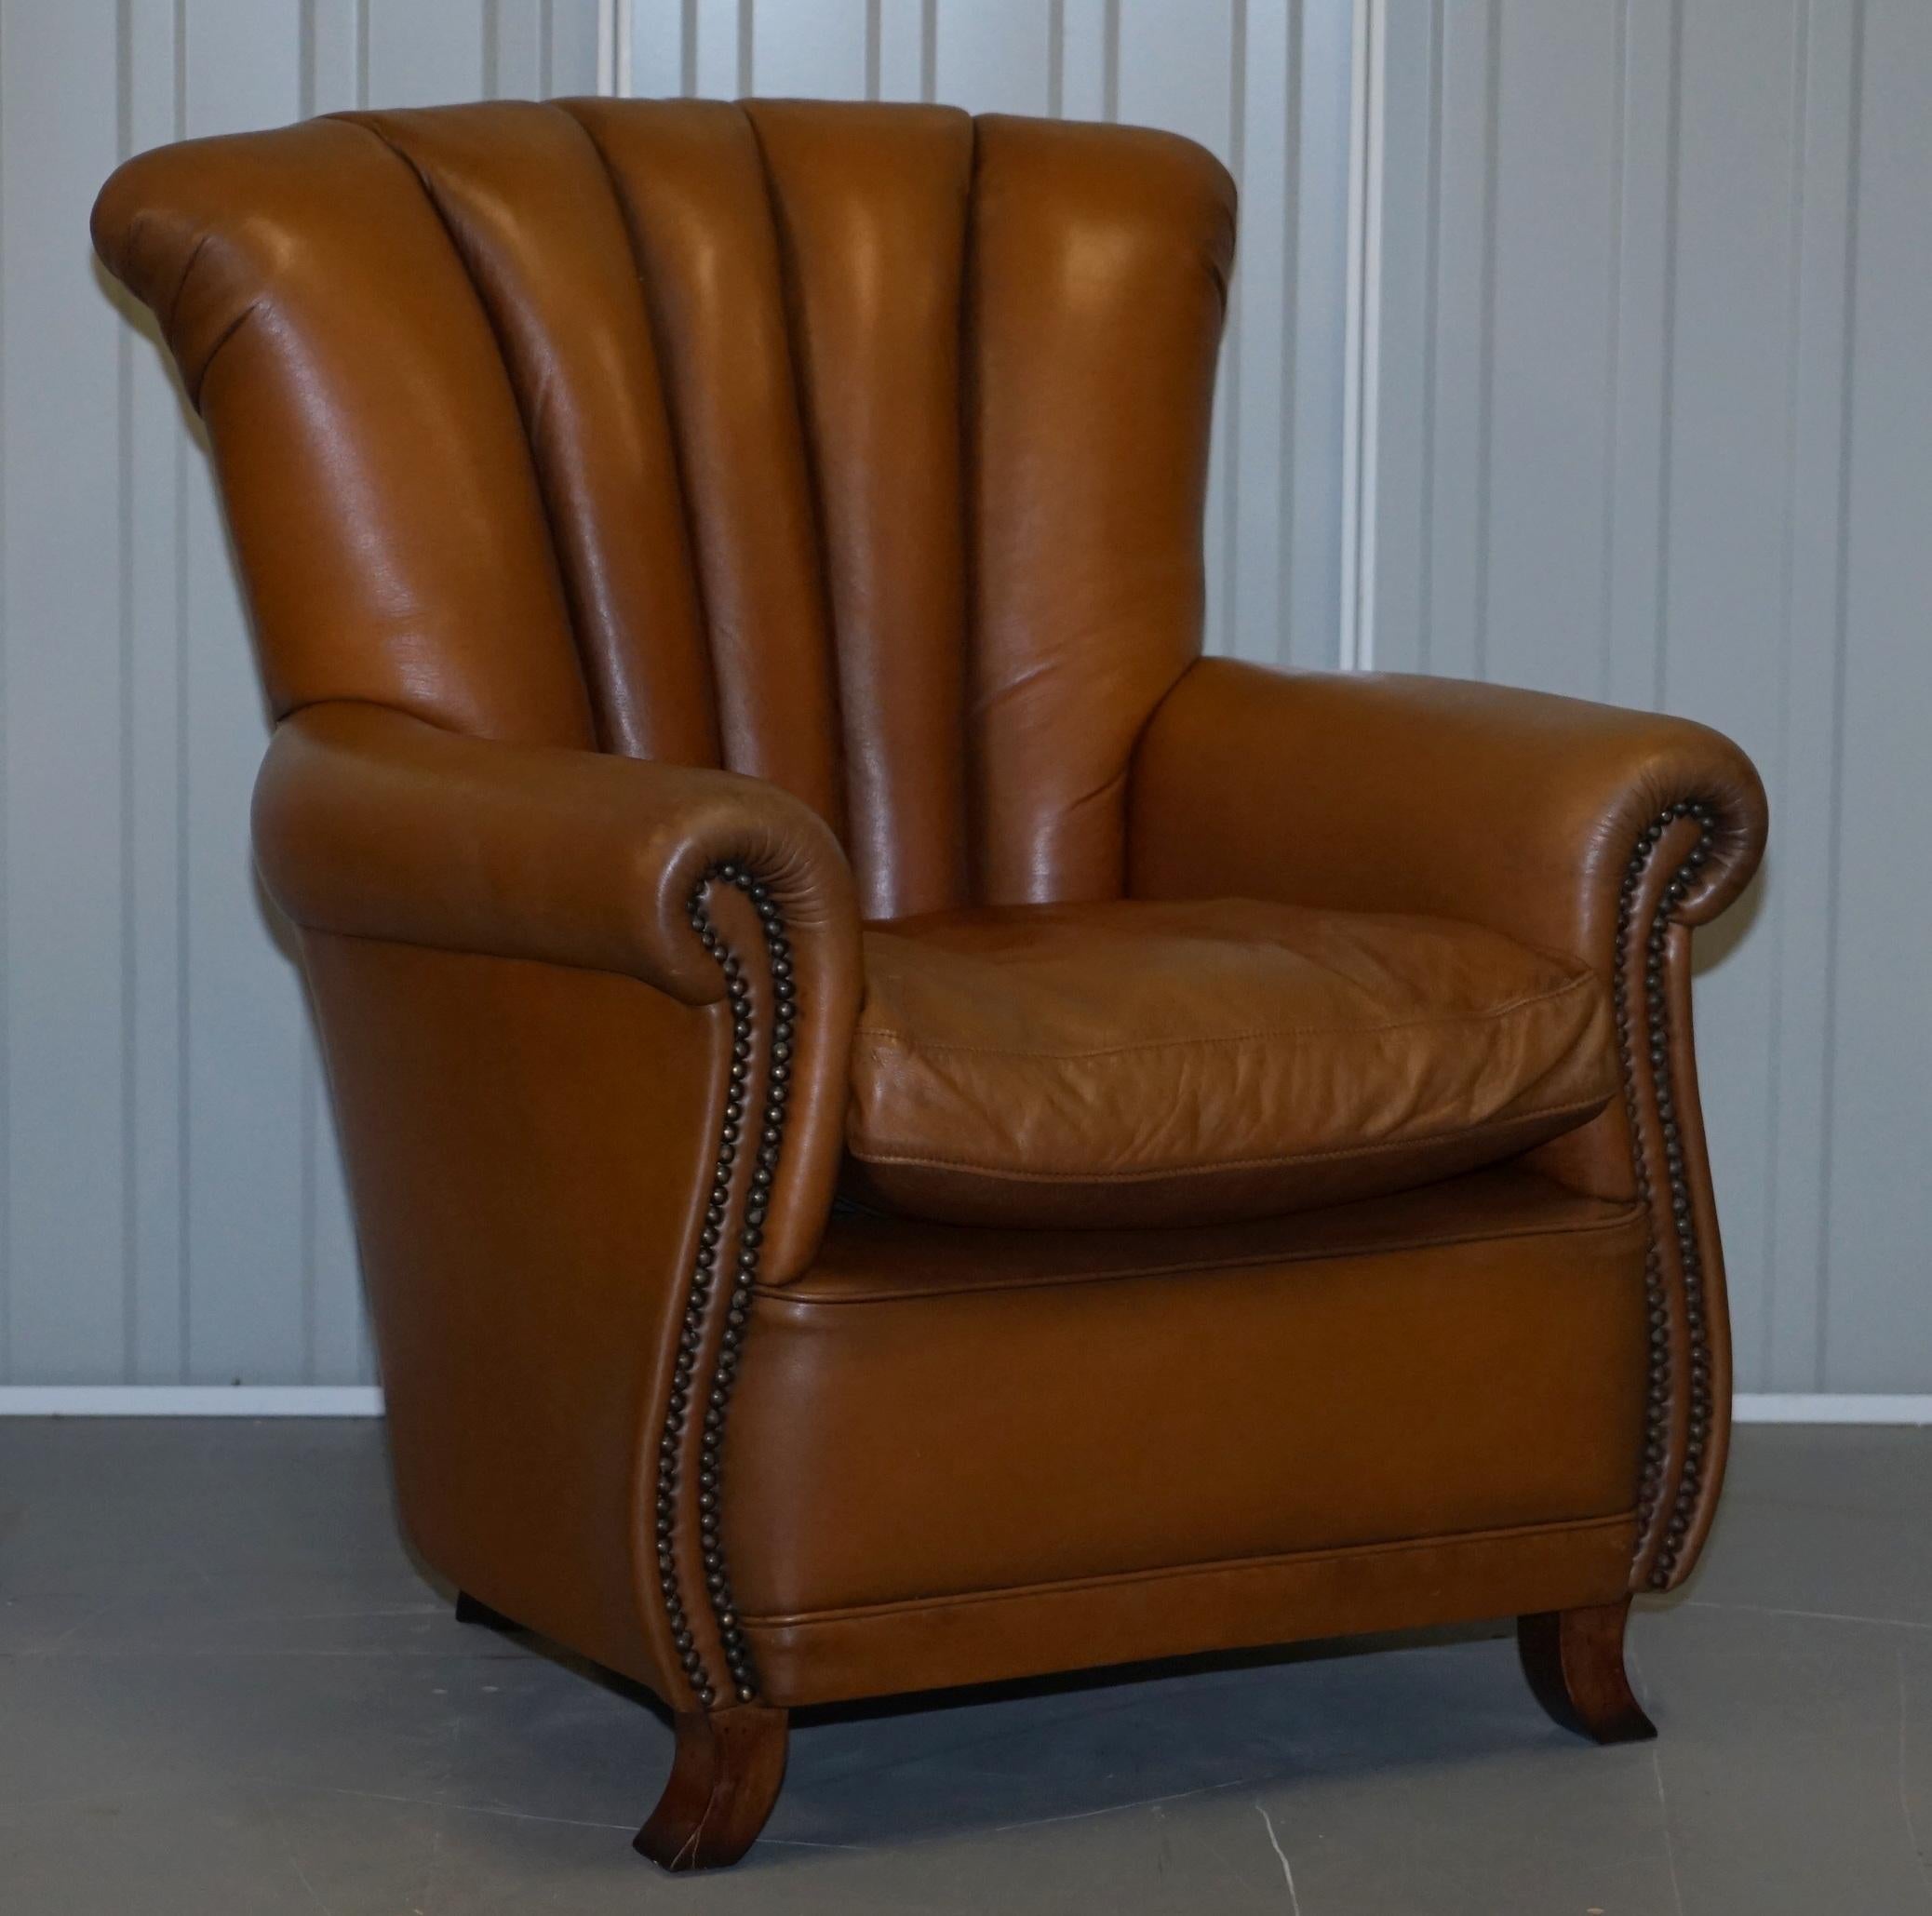 We are delighted to this lovely pair of Art Deco style Tetrad Ella aged tan brown leather armchairs

These are one of my favorite armchairs, they sit like a large club chair but they are very small and compact. The cushions nice and medium soft